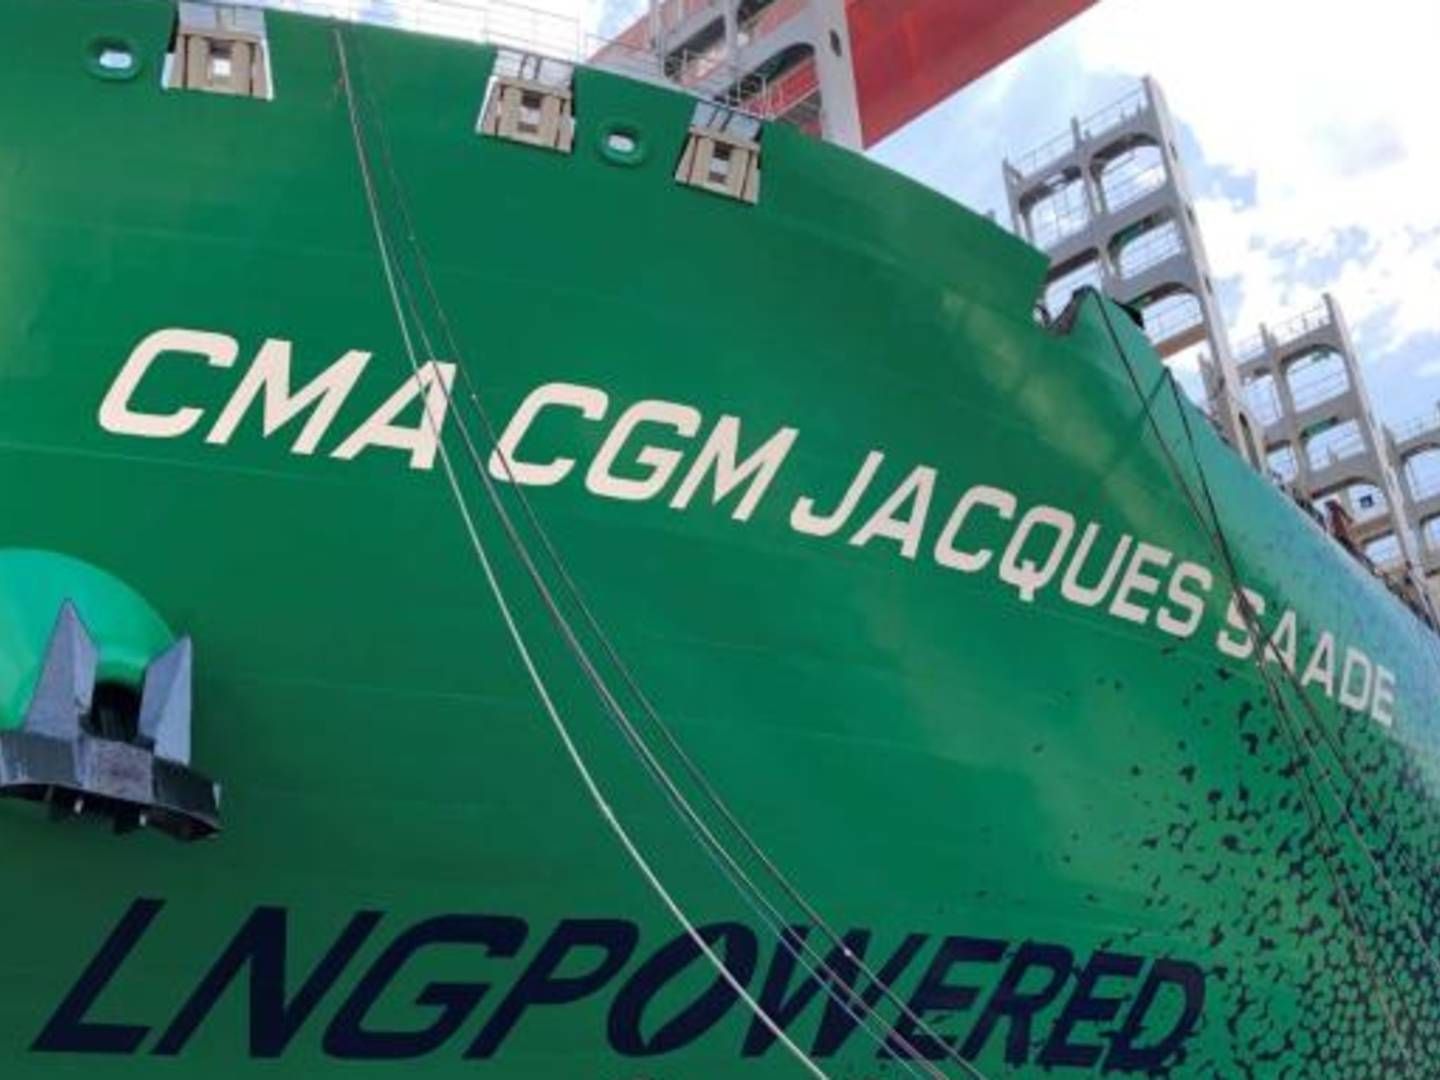 French carrier CMA CGM is betting heavily on constructing dual-fuel container ships capable of sailing on both LNG and heavy fuel. | Photo: PR/CMA CGM